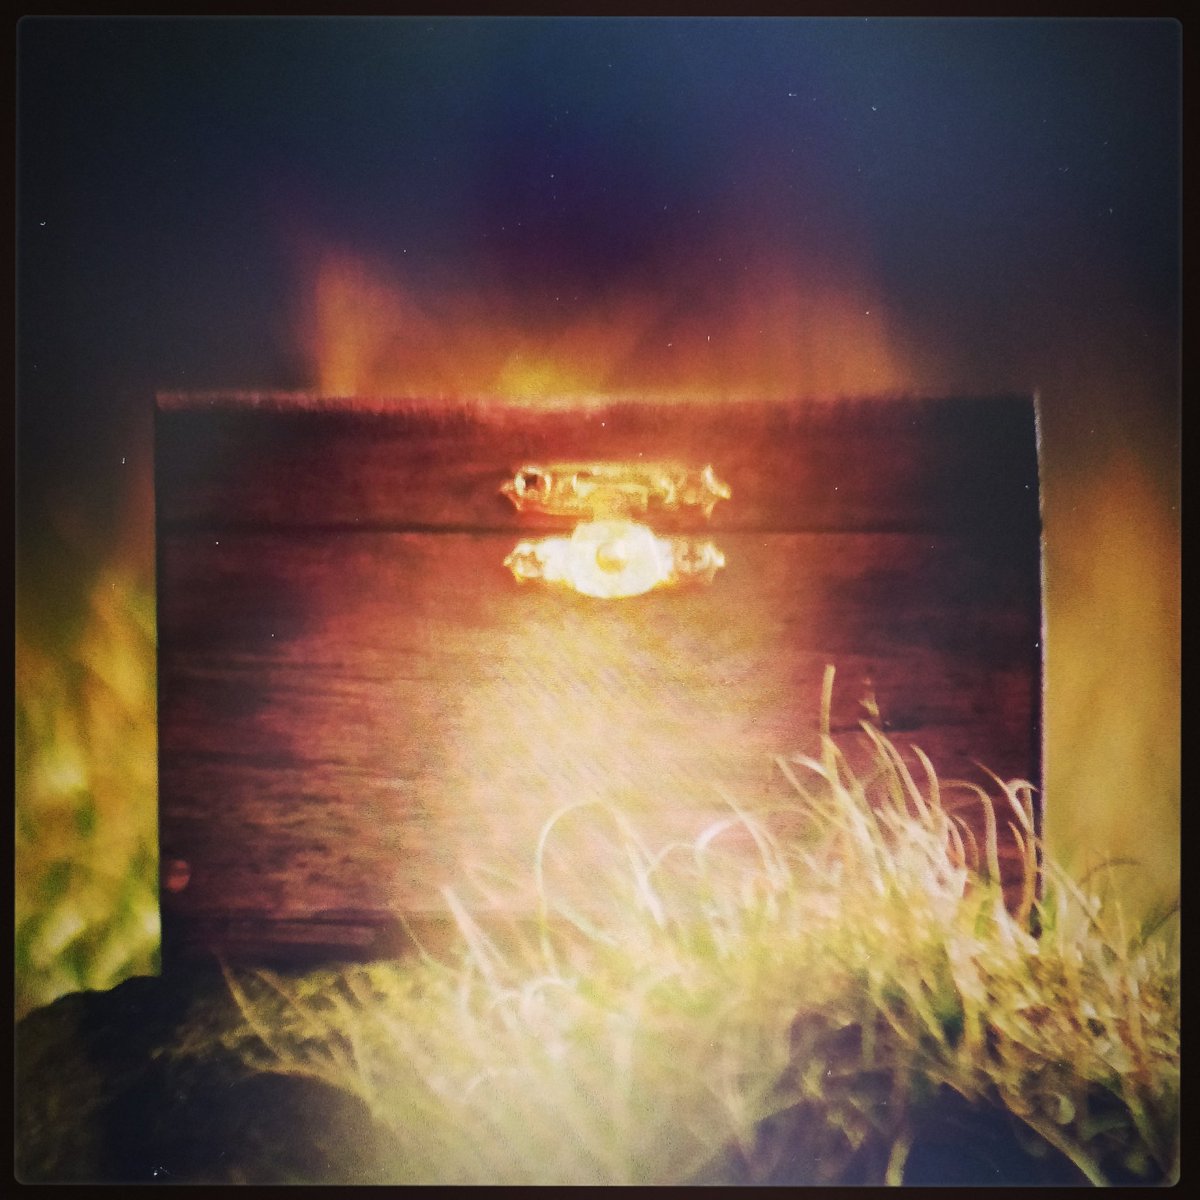 'These enigmatic receptacles, and the secrets that lie therein, can only be found by those willing to put in a little detective work'
#boxshortfilm #womeninfilm #indiefilm #filmmaking #dartmoor #letterboxing #box #enigmatic #detectivework